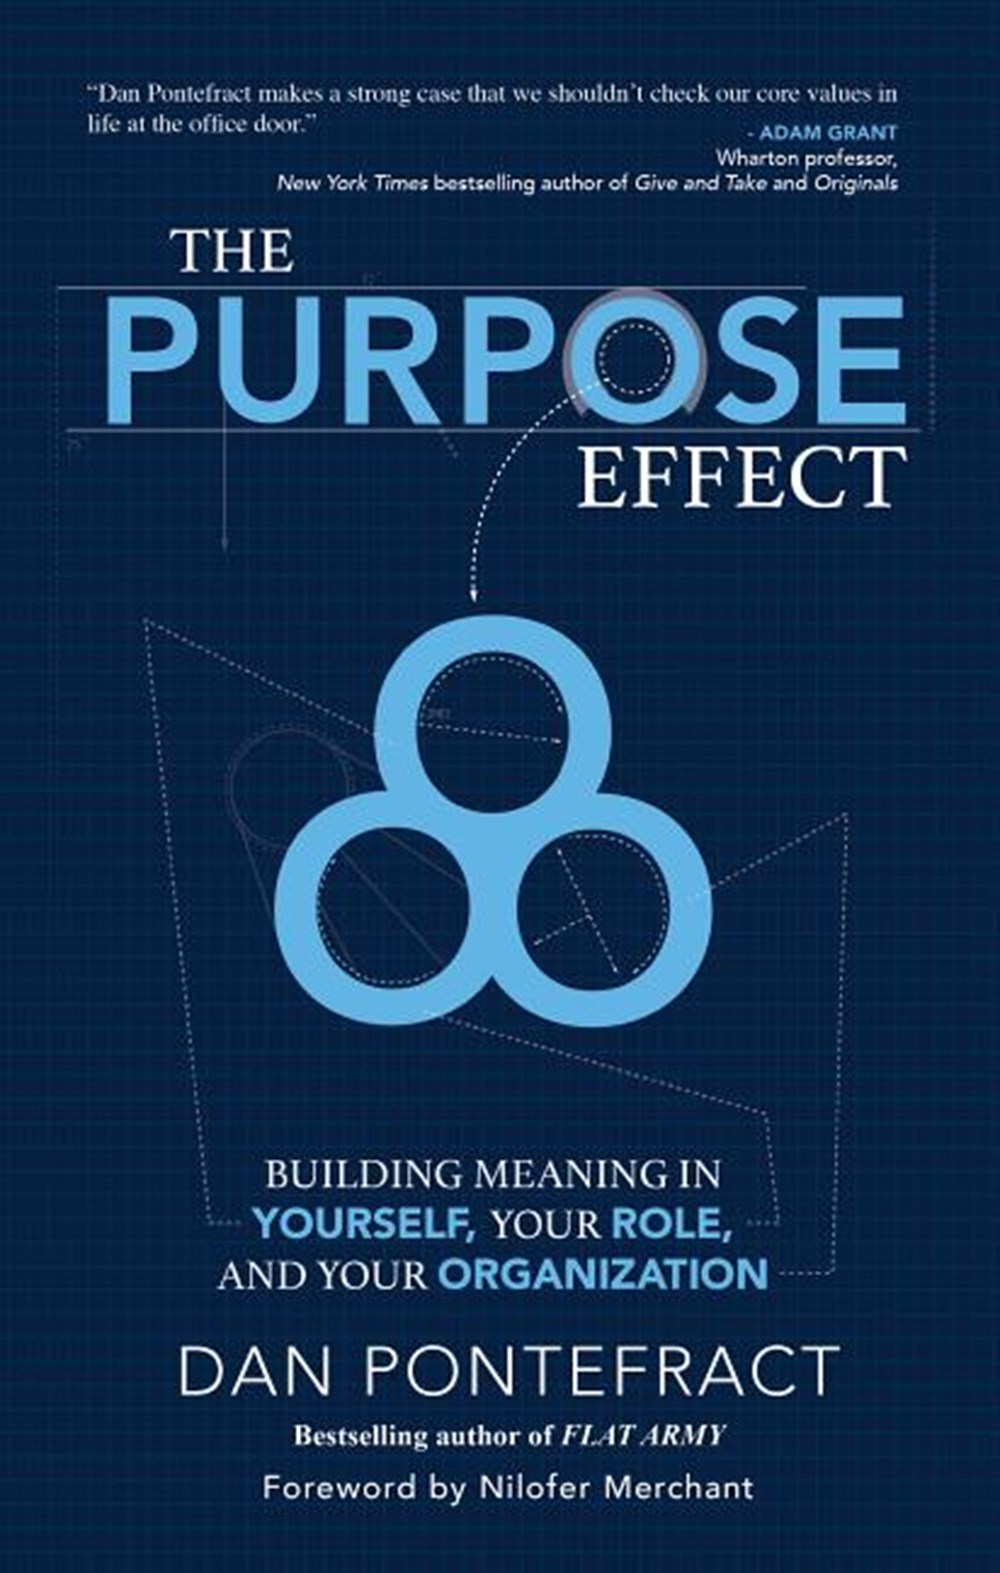 Purpose Effect Building Meaning in Yourself, Your Role and Your Organization